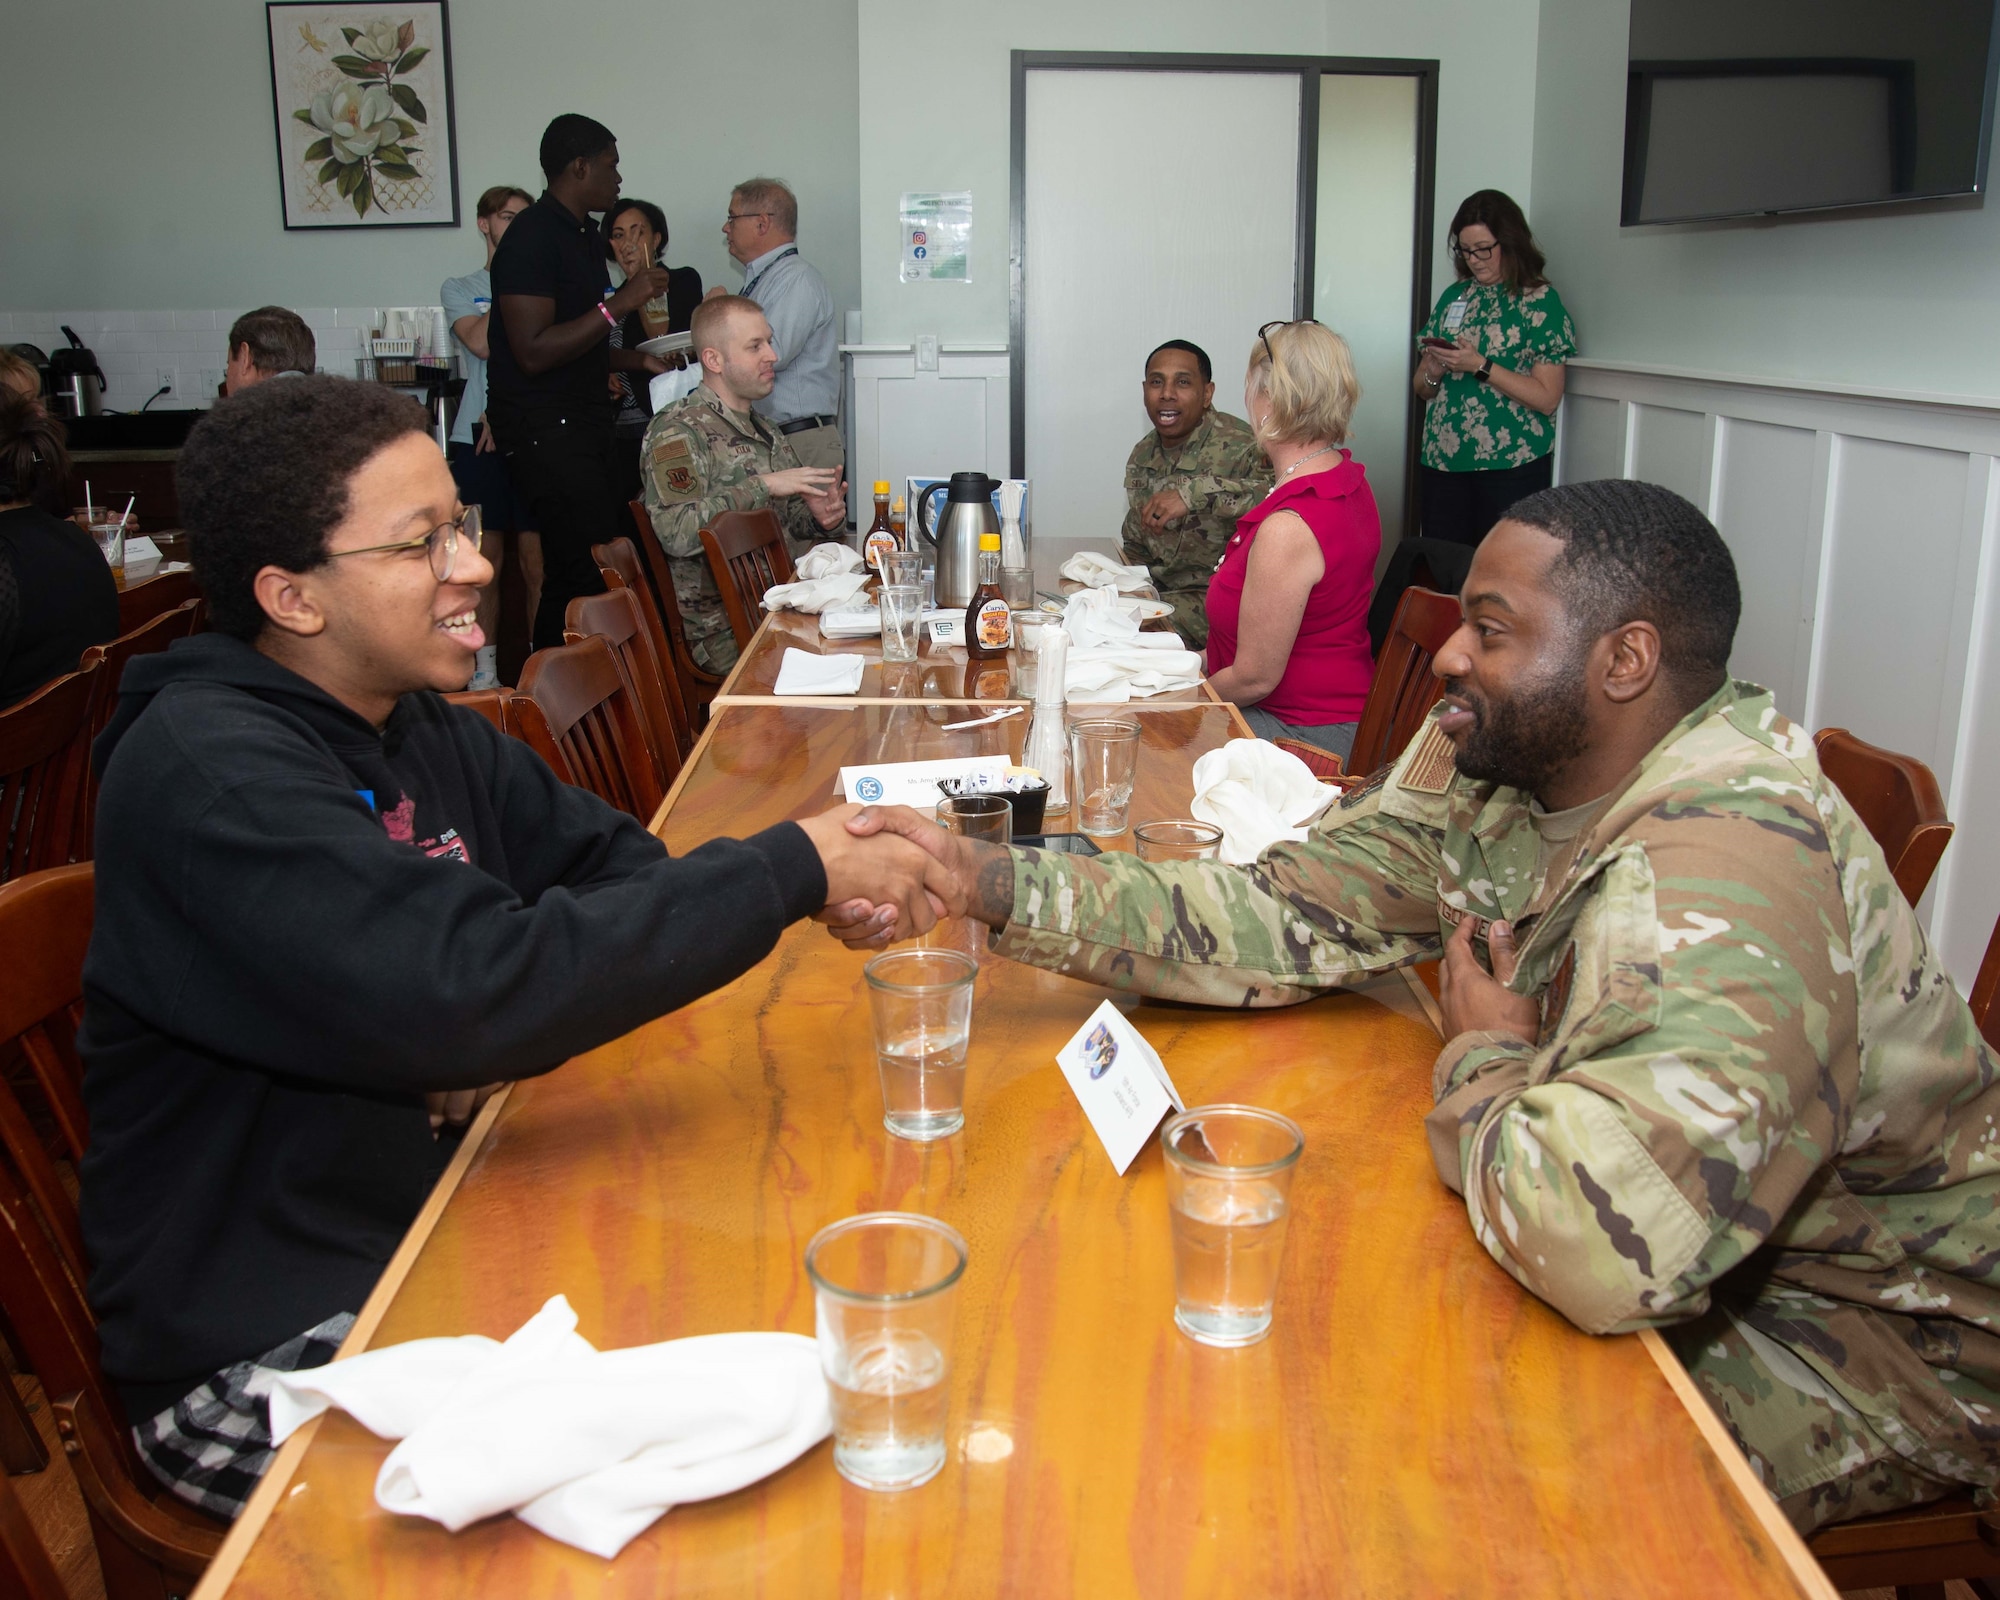 A person in a camouflage uniform shakes hands with a student while sitting at a table.